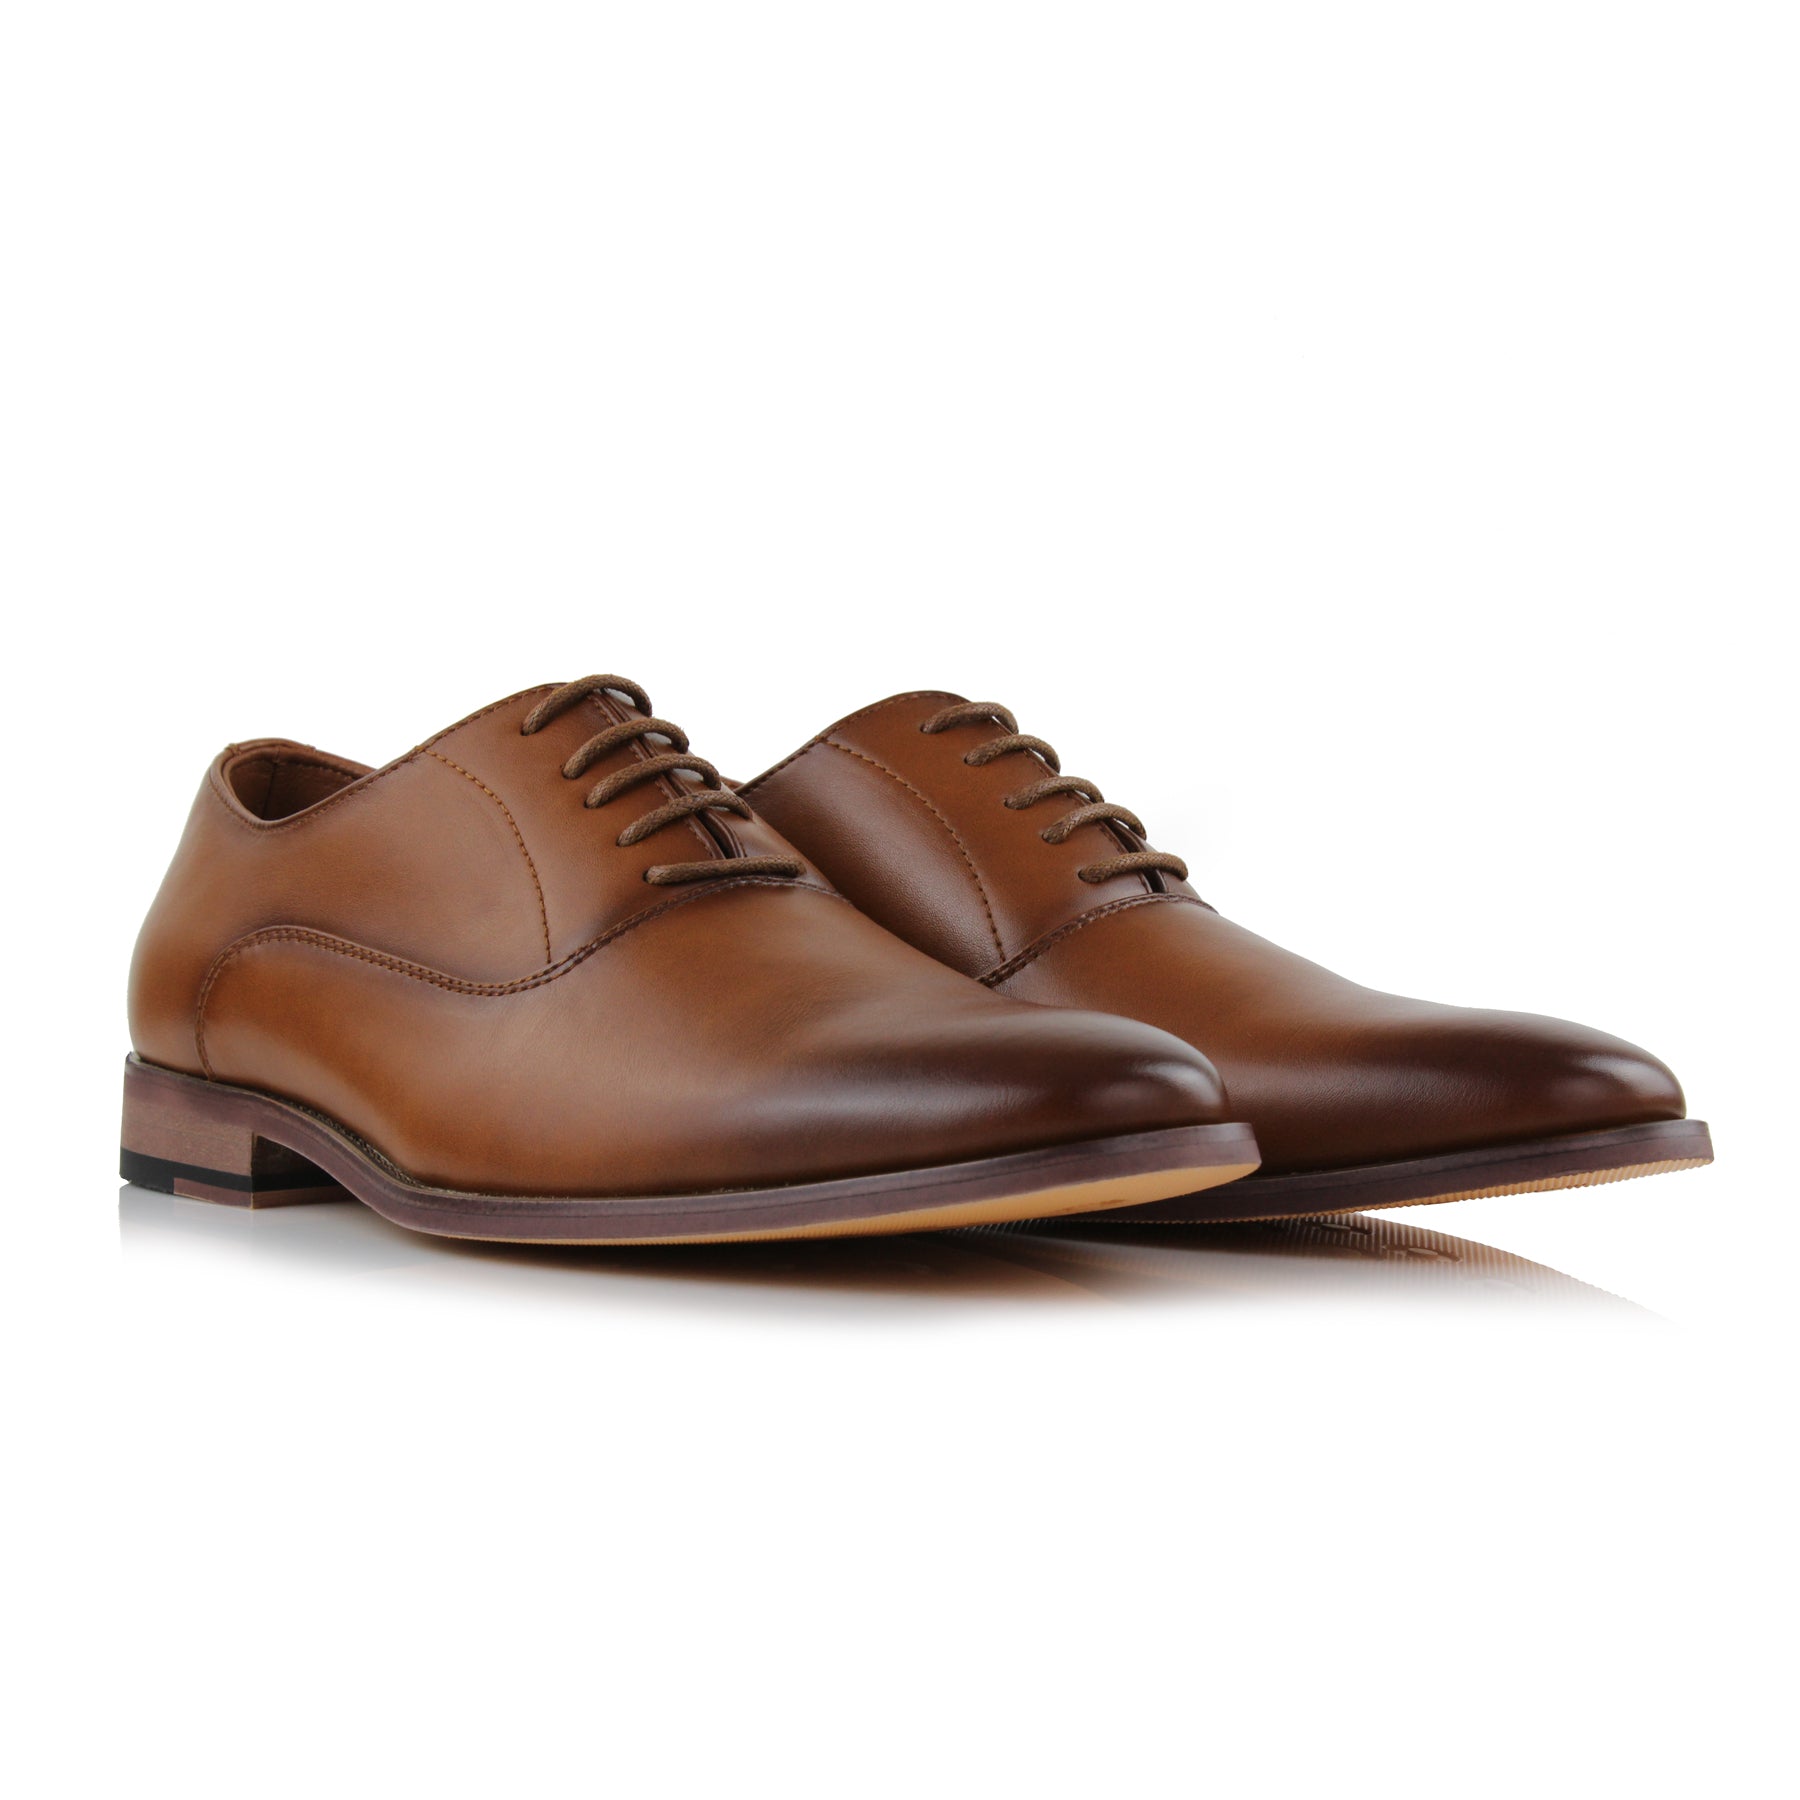 Burnished Leather Oxfords | George by Ferro Aldo | Conal Footwear | Paired Angle View